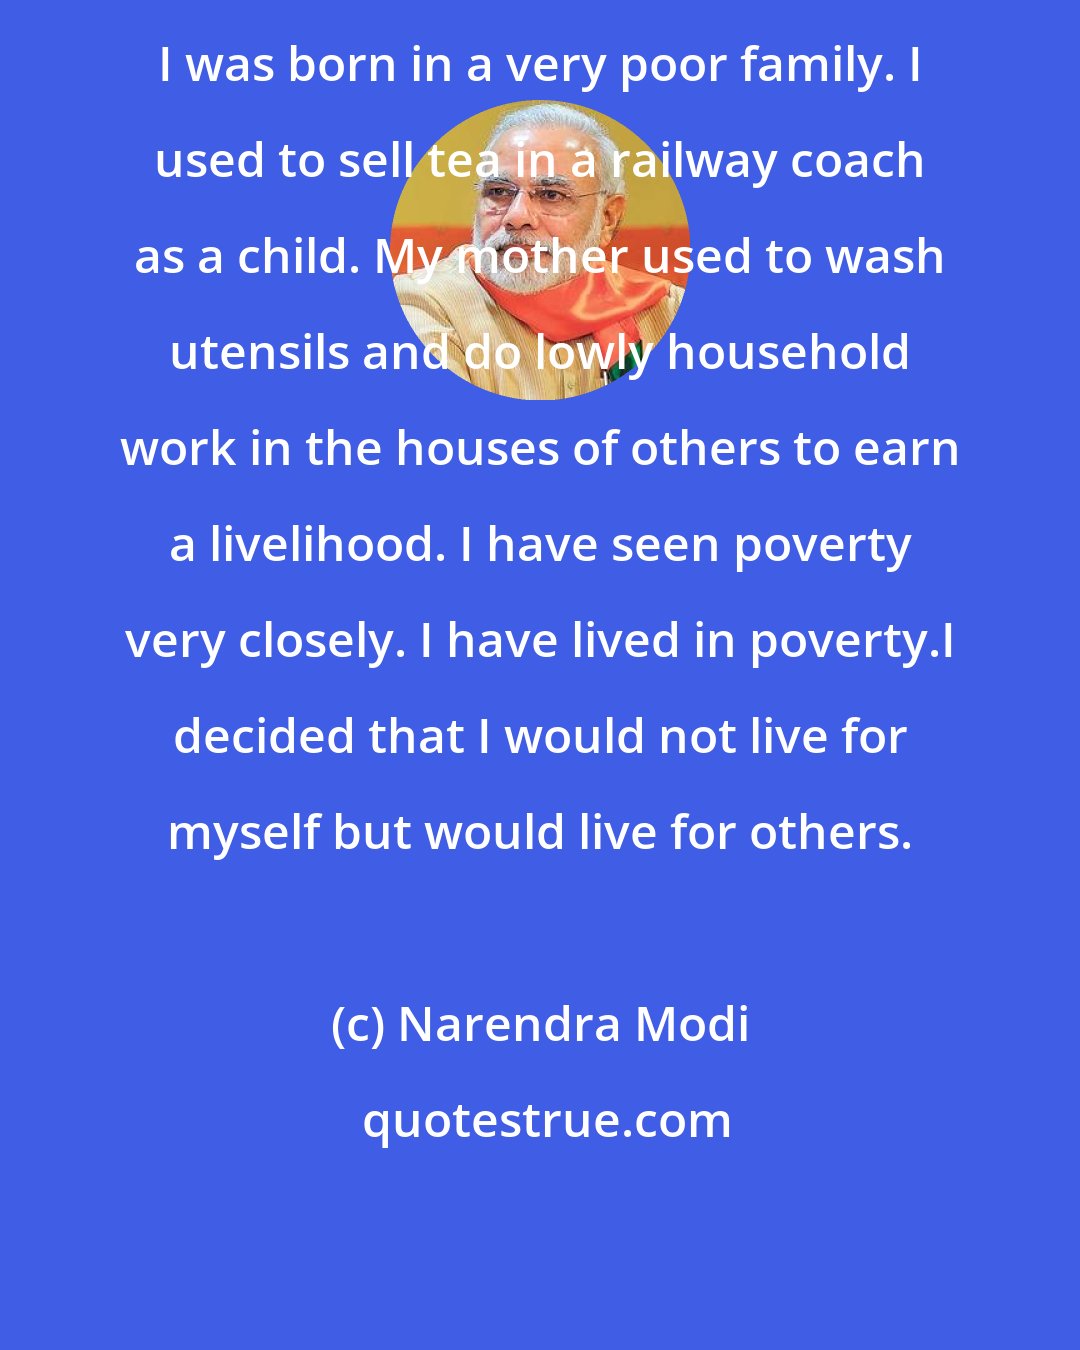 Narendra Modi: I was born in a very poor family. I used to sell tea in a railway coach as a child. My mother used to wash utensils and do lowly household work in the houses of others to earn a livelihood. I have seen poverty very closely. I have lived in poverty.I decided that I would not live for myself but would live for others.